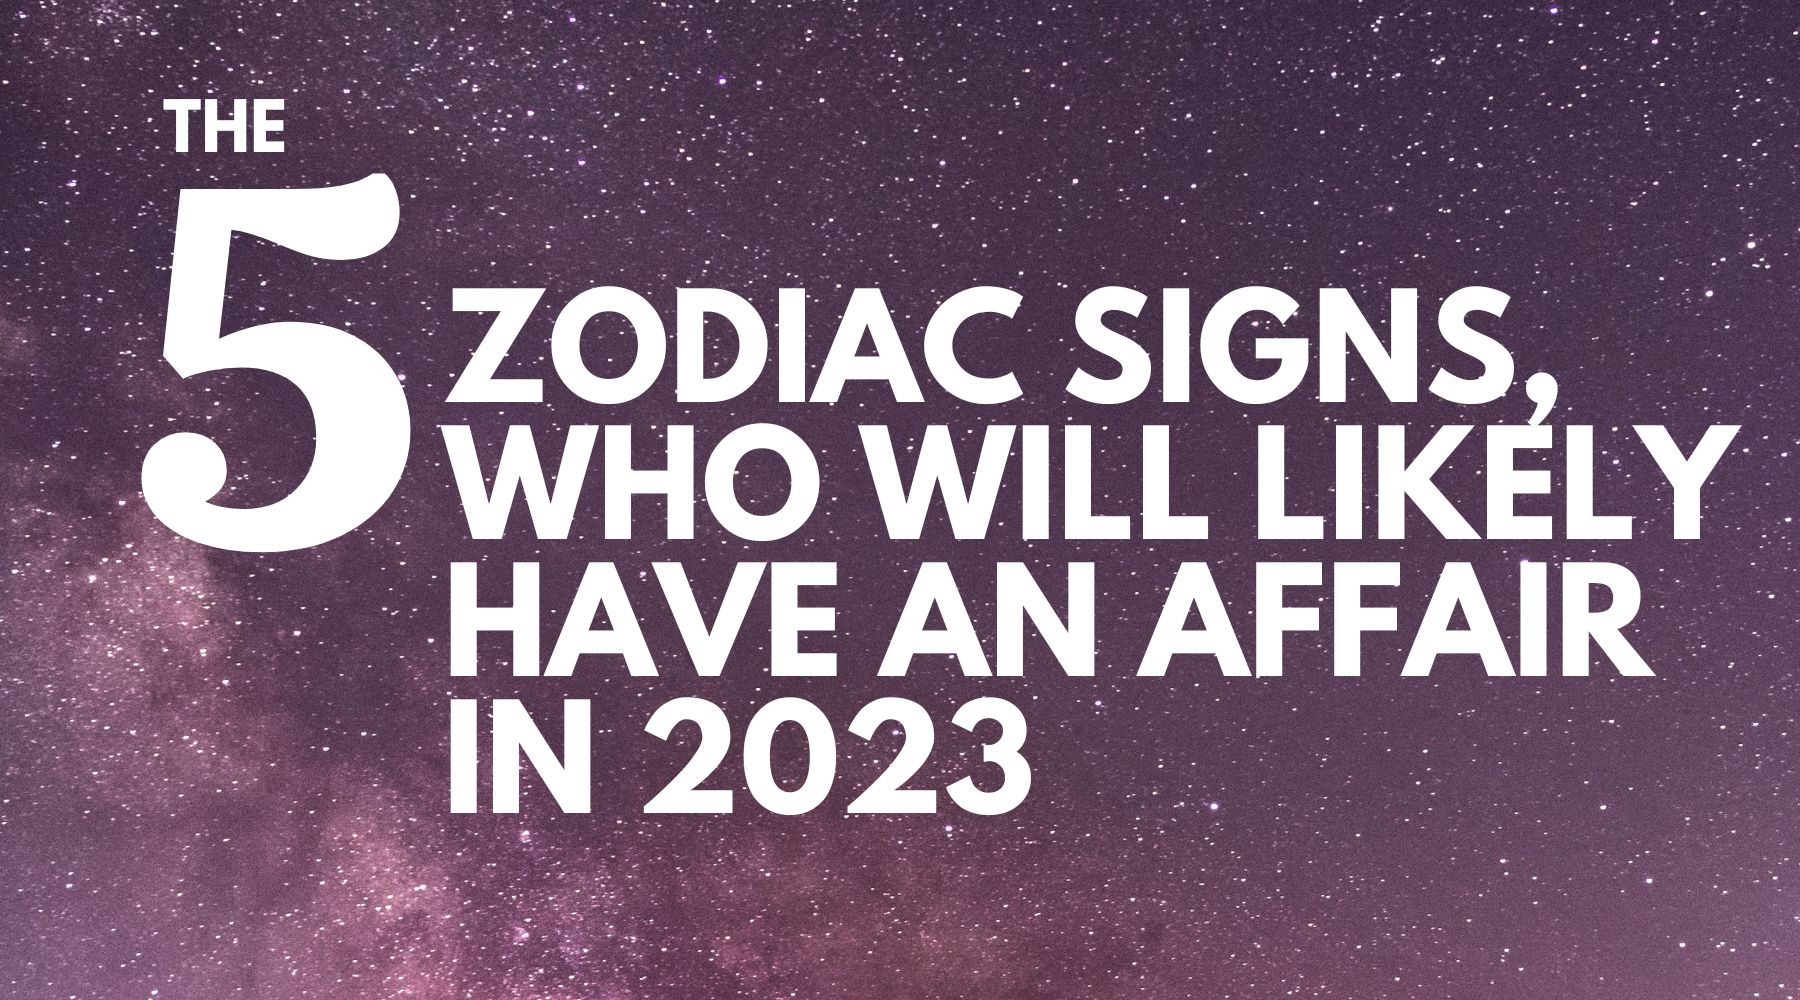 5 zodiac signs, who will likely have an affair in 2023